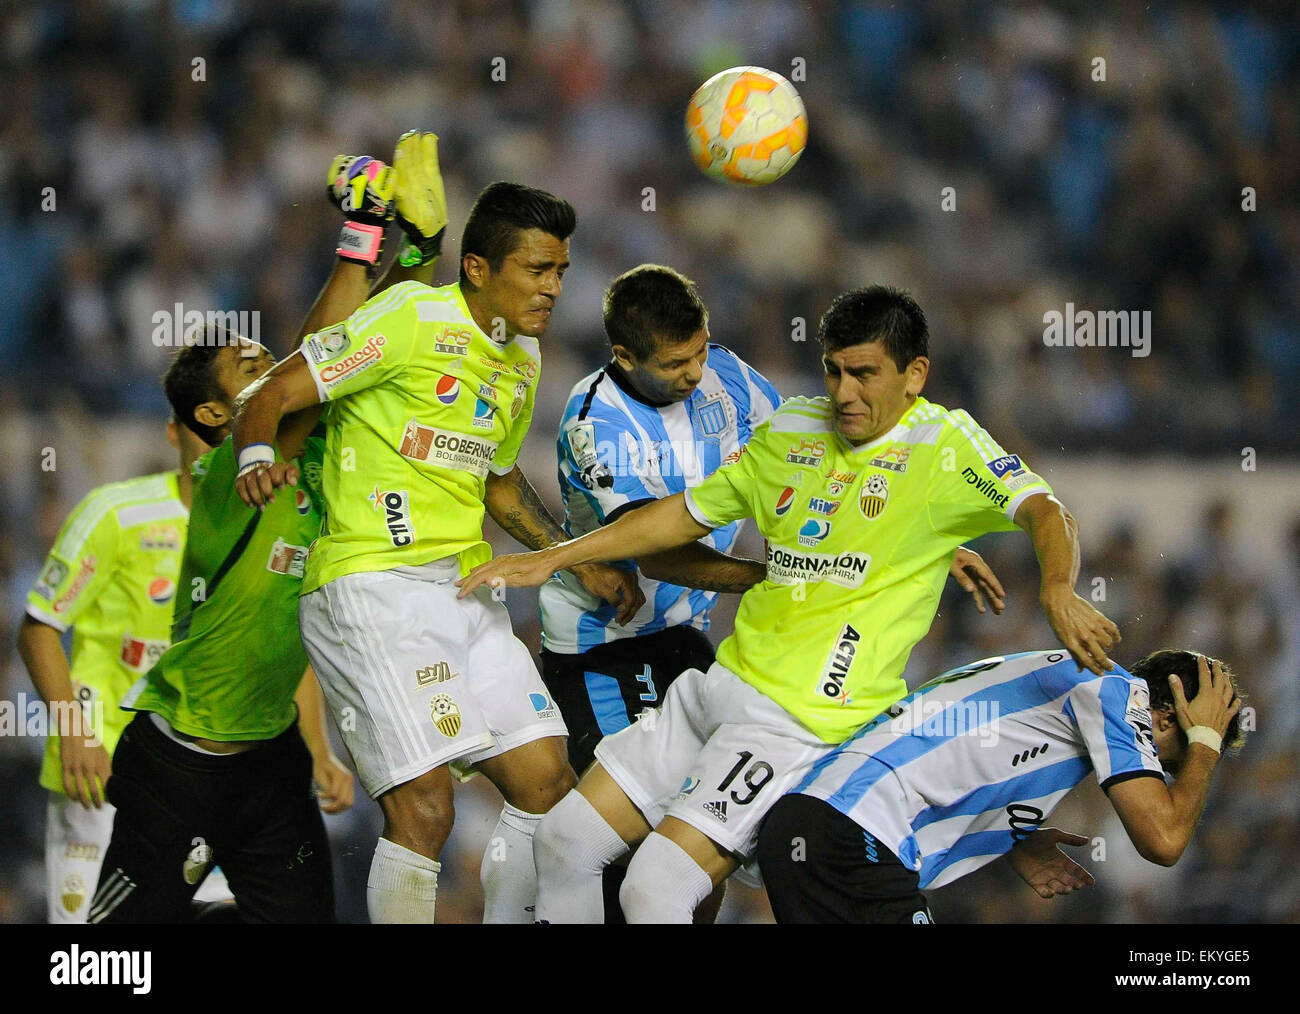 Buenos Aires, Argentina. 14th Apr, 2015. Racing Club's Leandro Grimi (C) of Argentina, vies for the ball with Deportivo Tachira's Carlos Javier Lopez (2-R) of Venezuela, during the match of Copa Libertadores in the Presidente Peron Stadium, in Buenos Aires, Argentina, on April 14, 2015. Credit:  Fernando Gens/TELAM/Xinhua/Alamy Live News Stock Photo